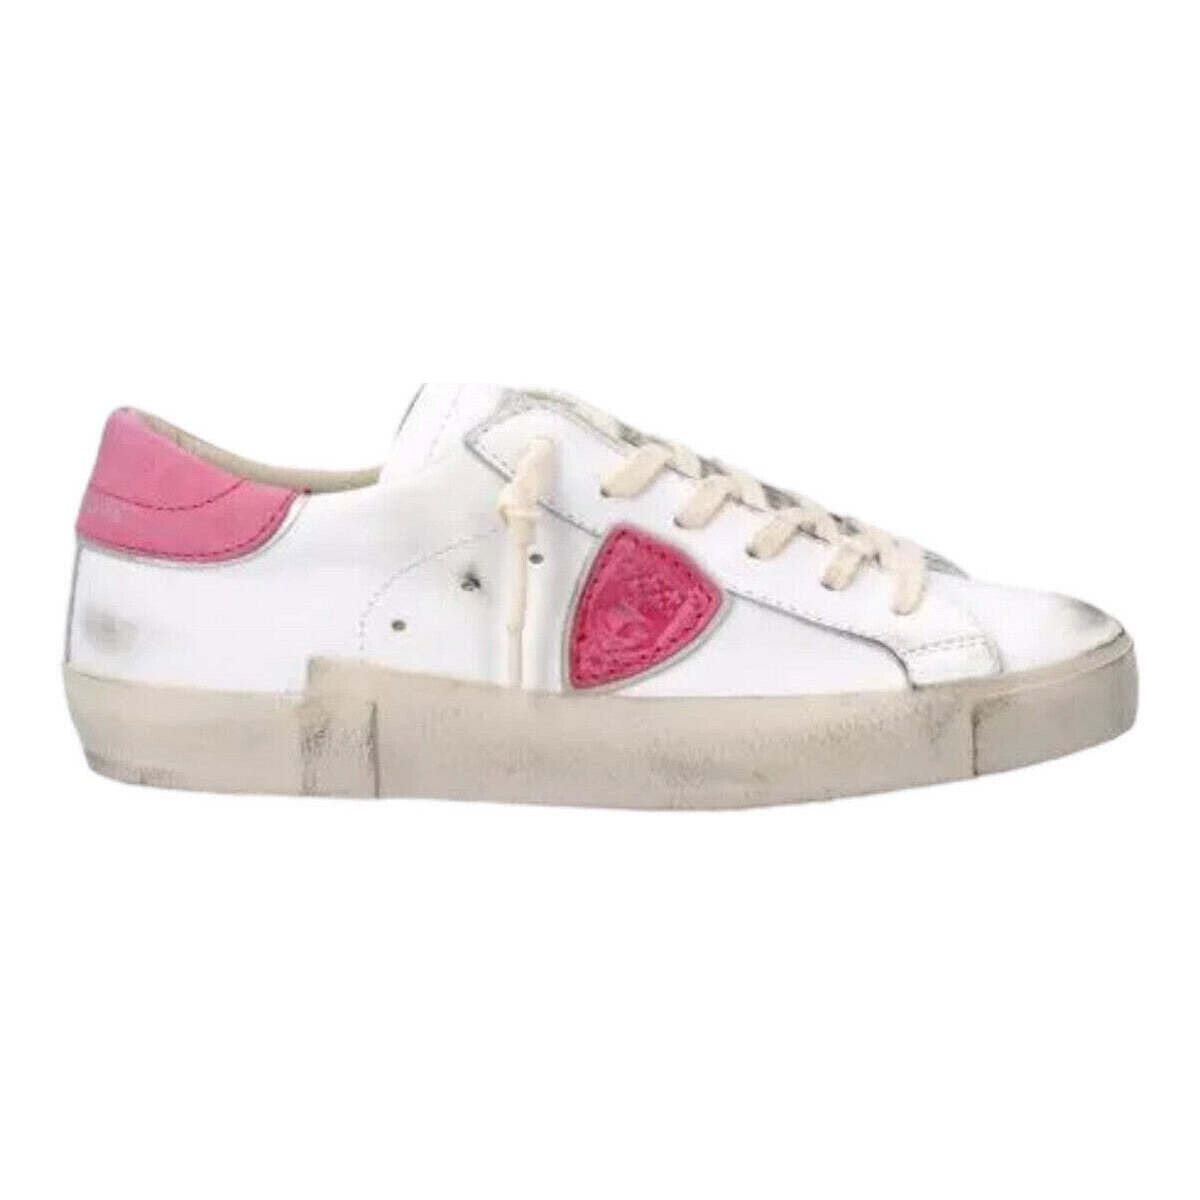 Chaussures Femme Baskets mode Philippe Model  Multicolore